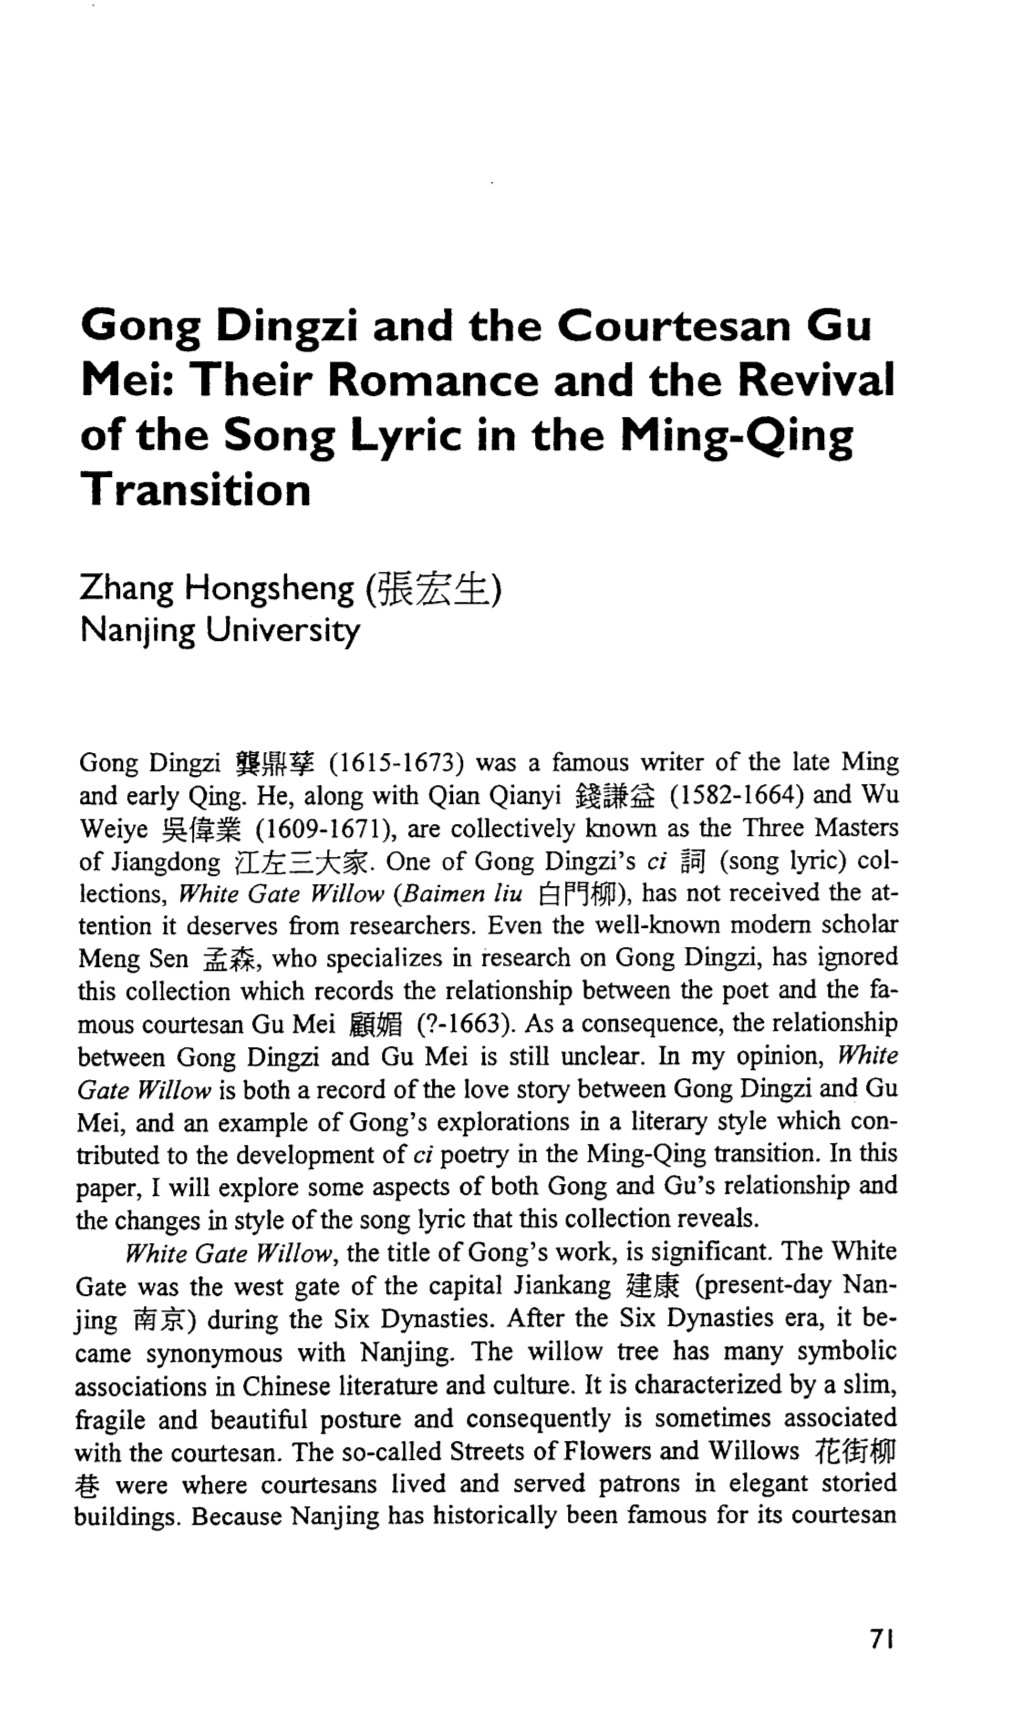 Gong Dingzi and the Courtesan Gu Mei: Their Romance and the Revival of the Song Lyric in the Ming-Qing Transition